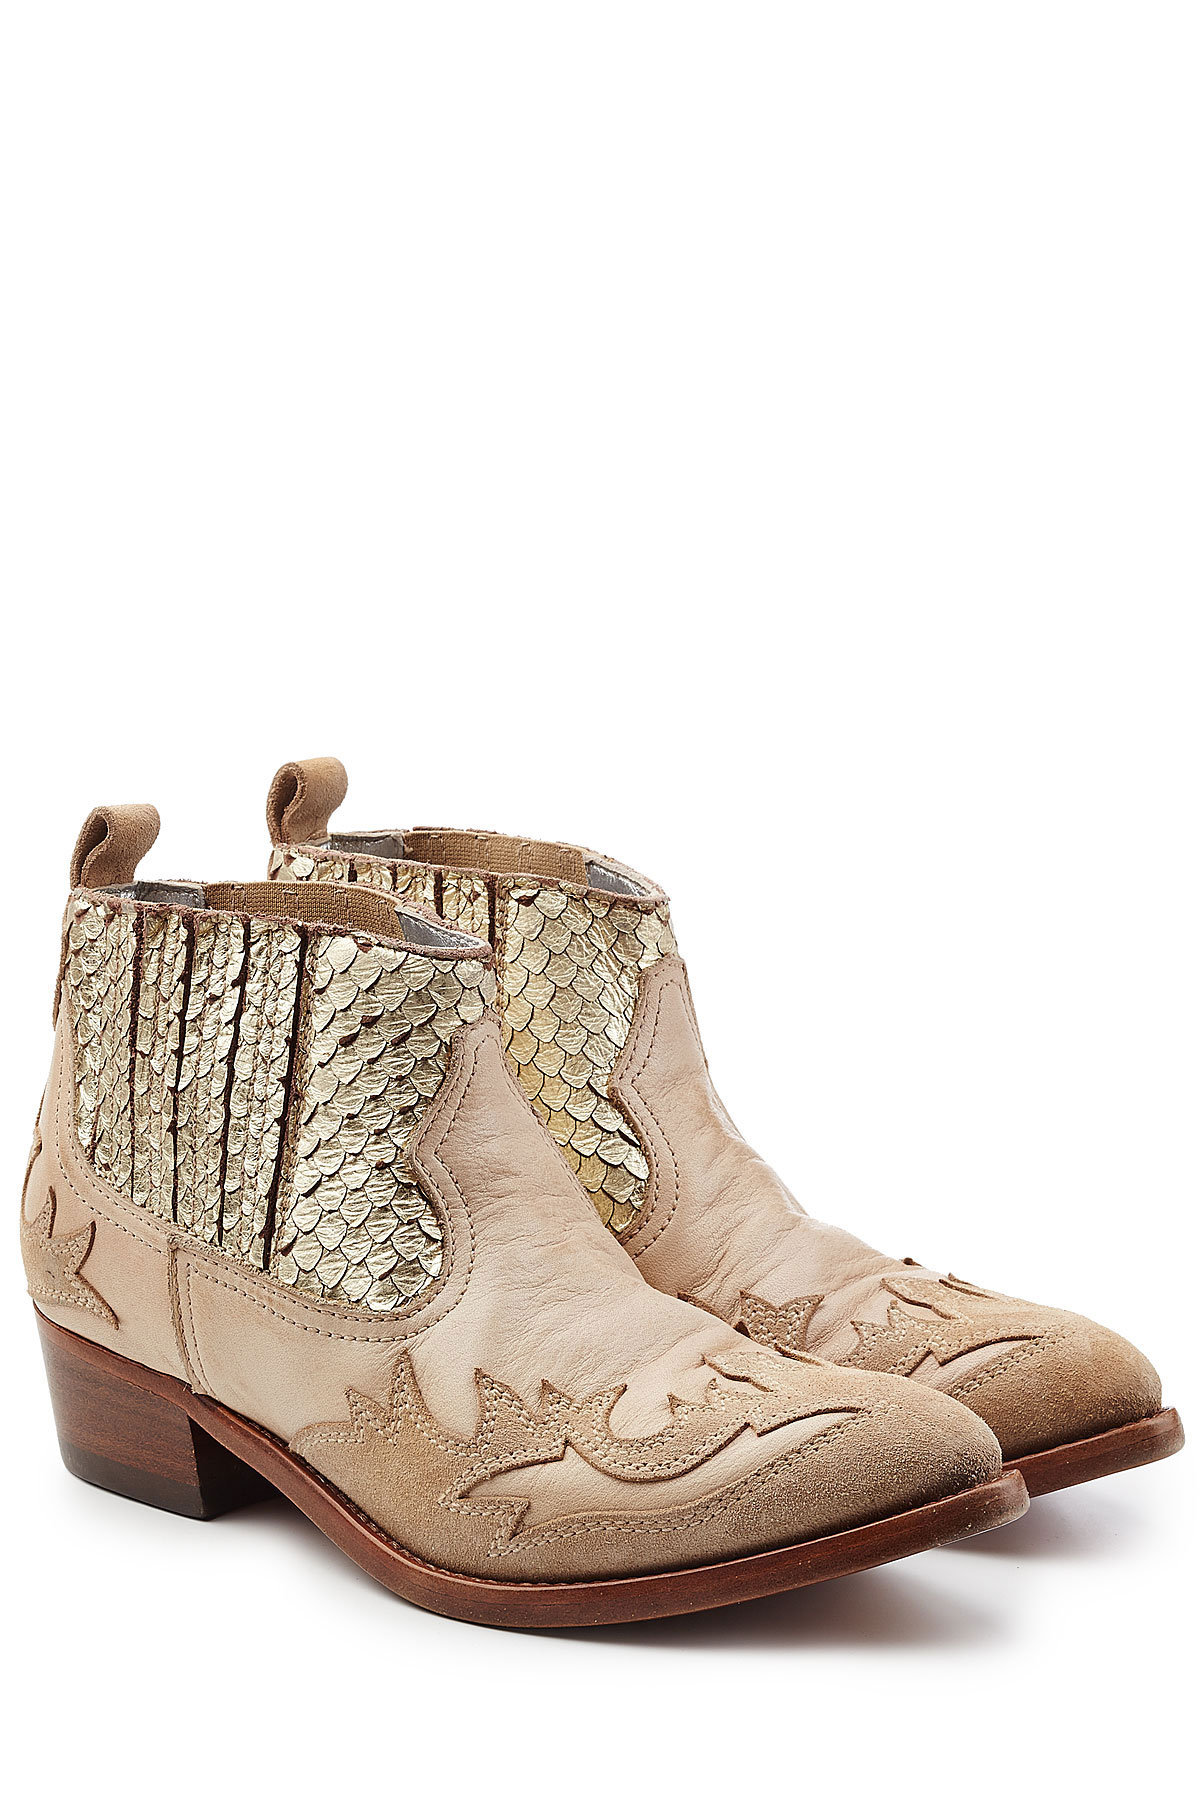 Golden Goose Deluxe Brand - Victory Ankle Boots with Leather and Suede